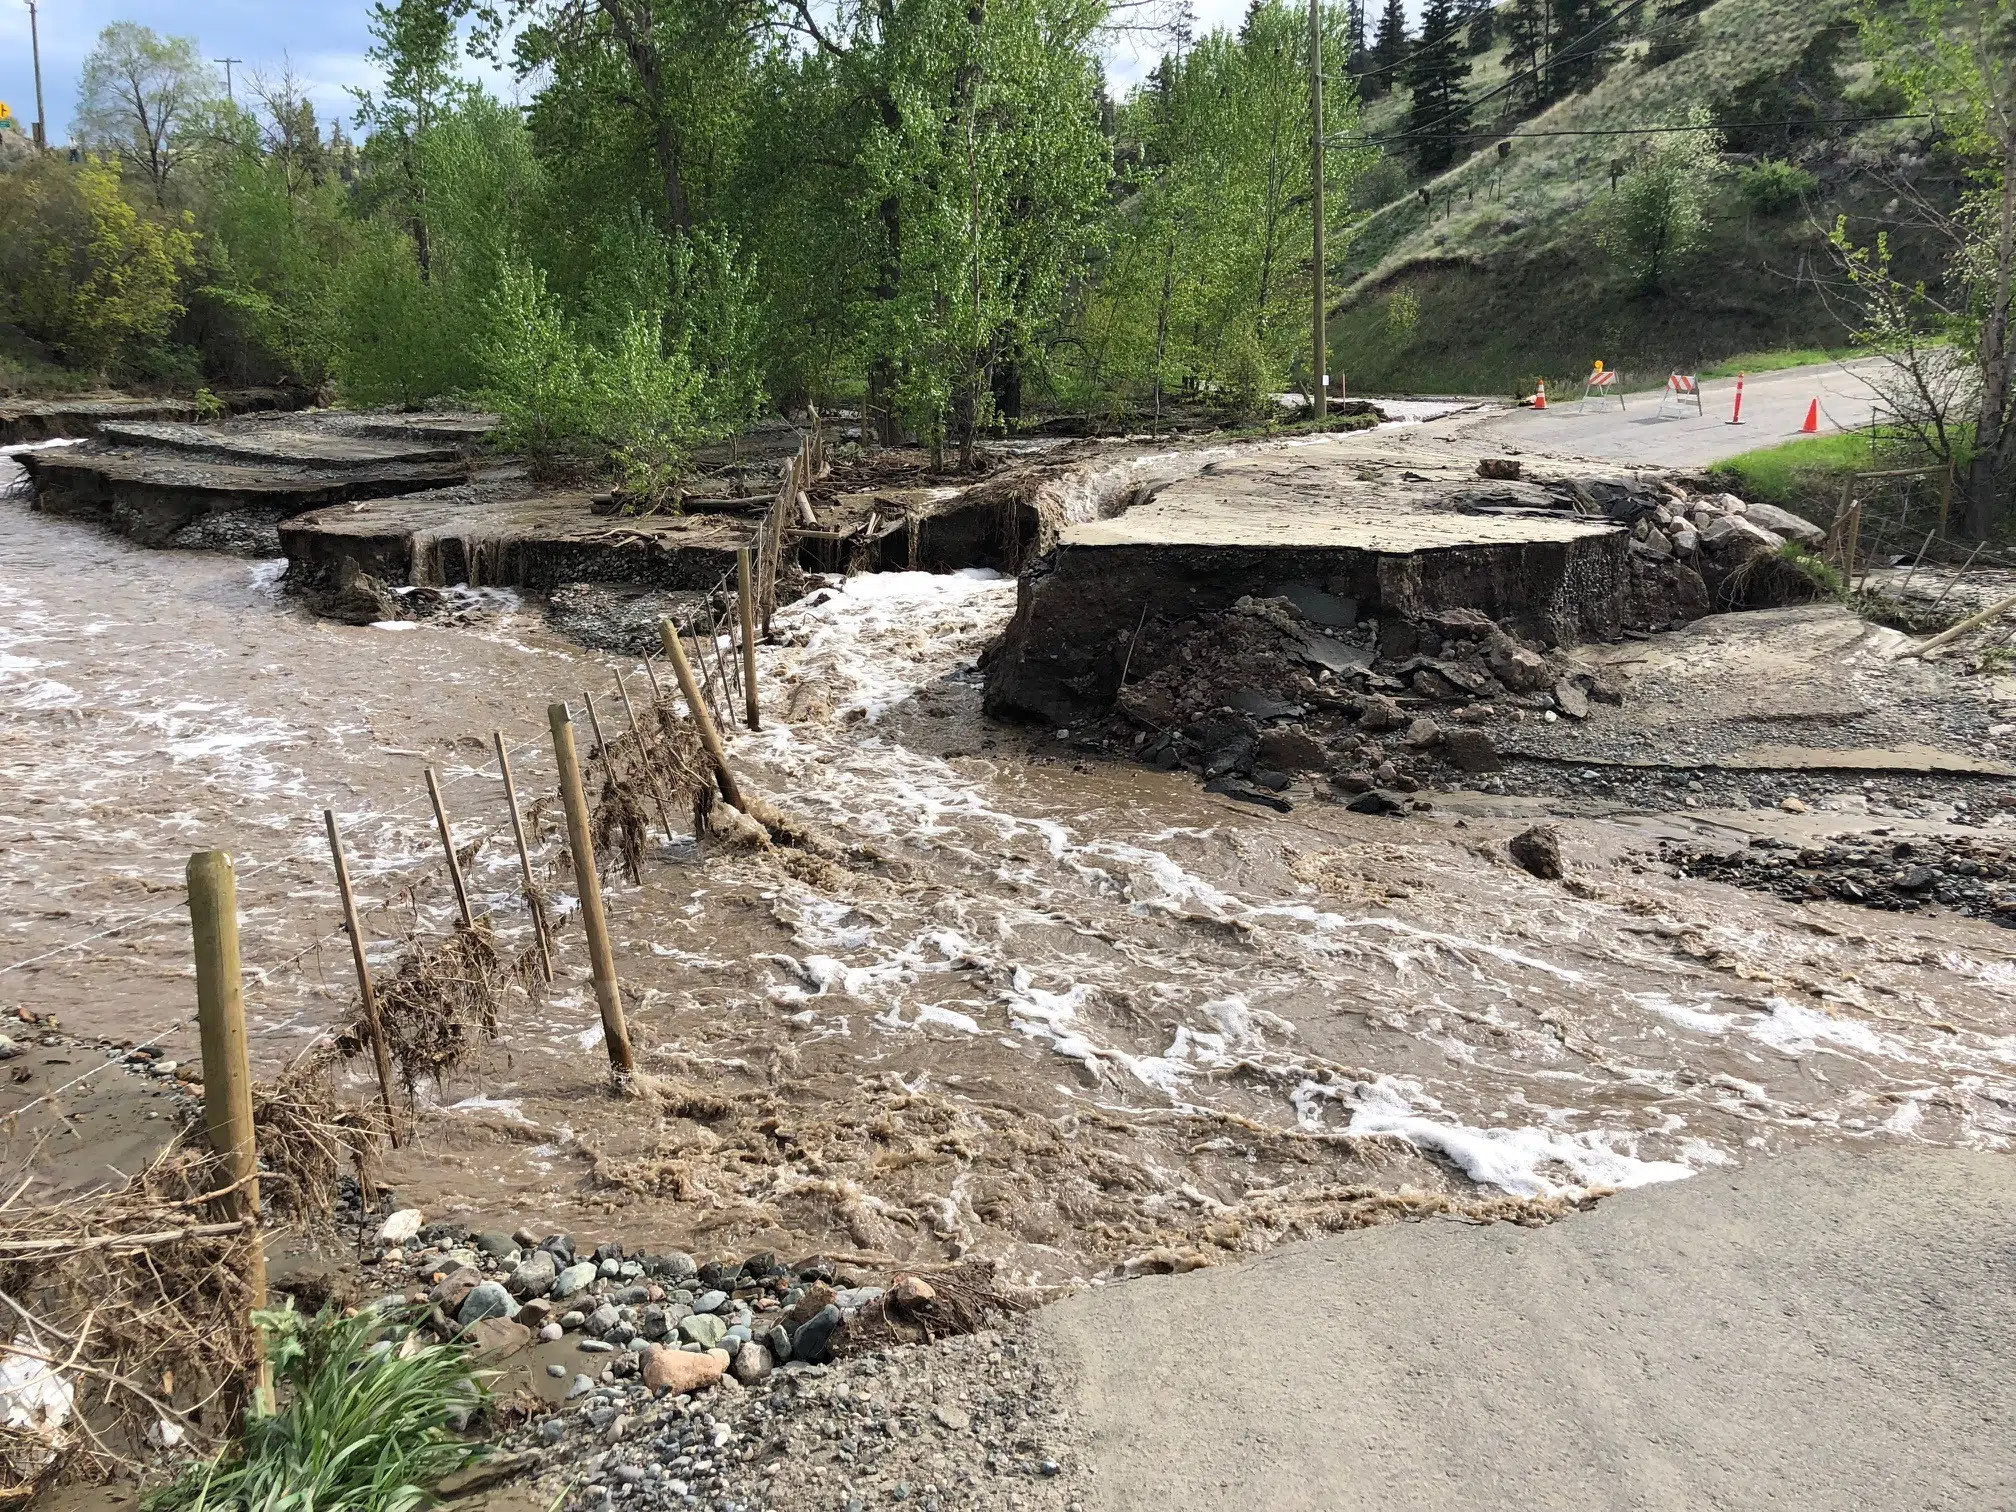 TNRD Director voicing concerns about future Cherry Creek flooding